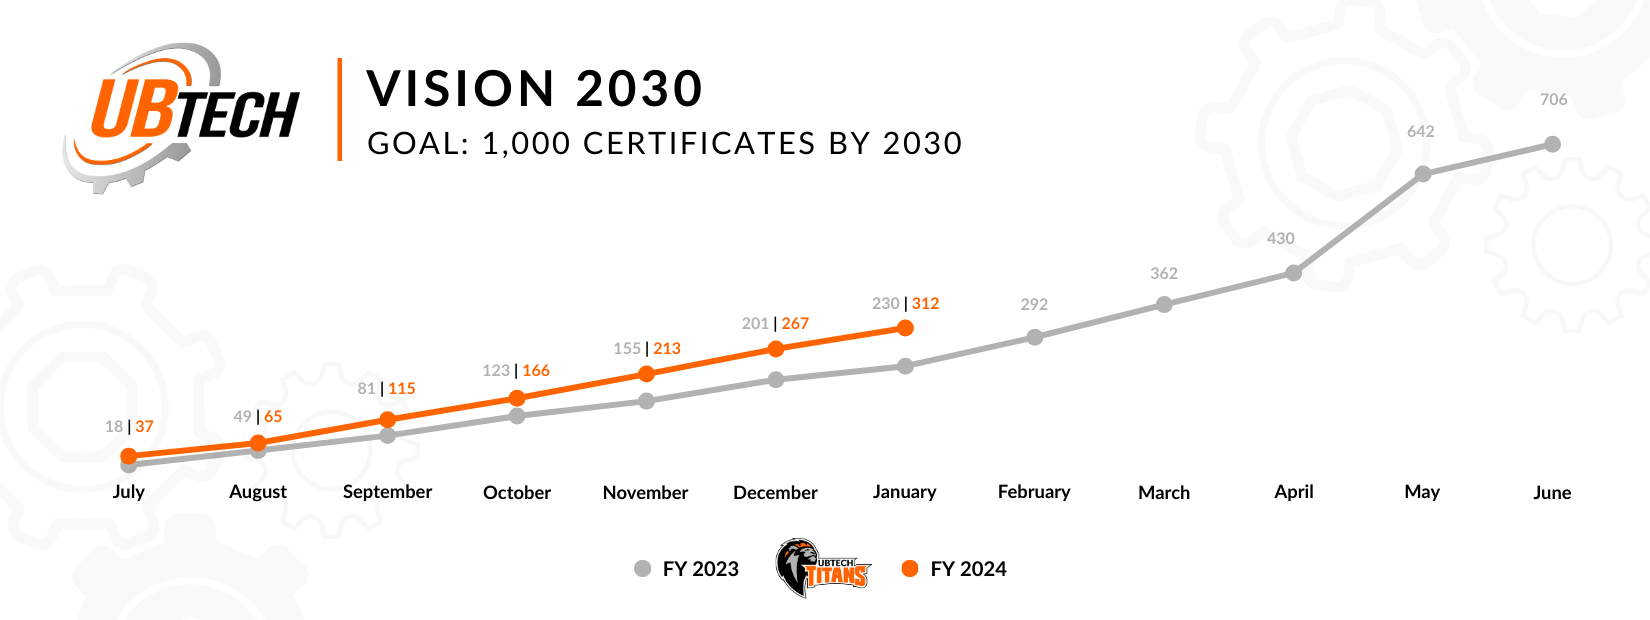 On our way to 1,000 certificates by 2030. September's certificate count was 115 for FY 2024, compared to 81 in September FY 2023